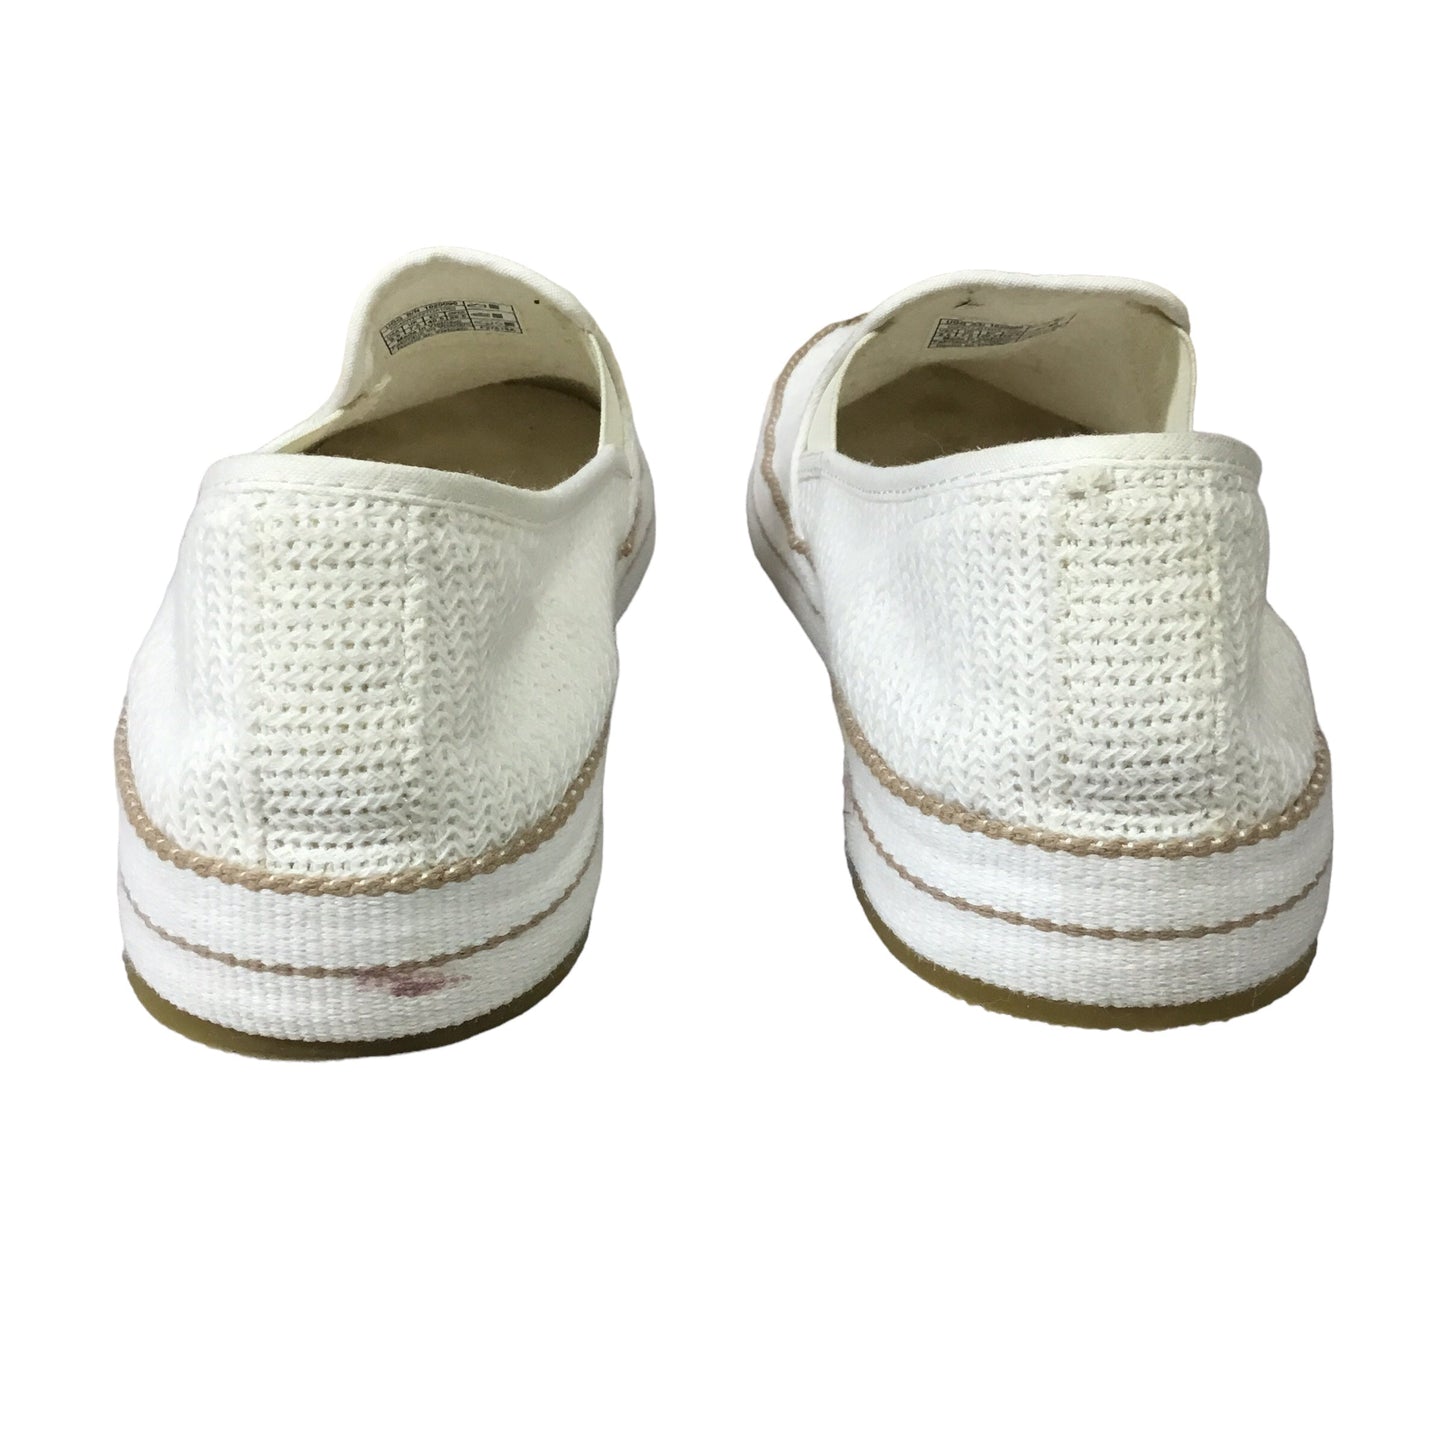 White Shoes Flats Ugg, Size 9.5